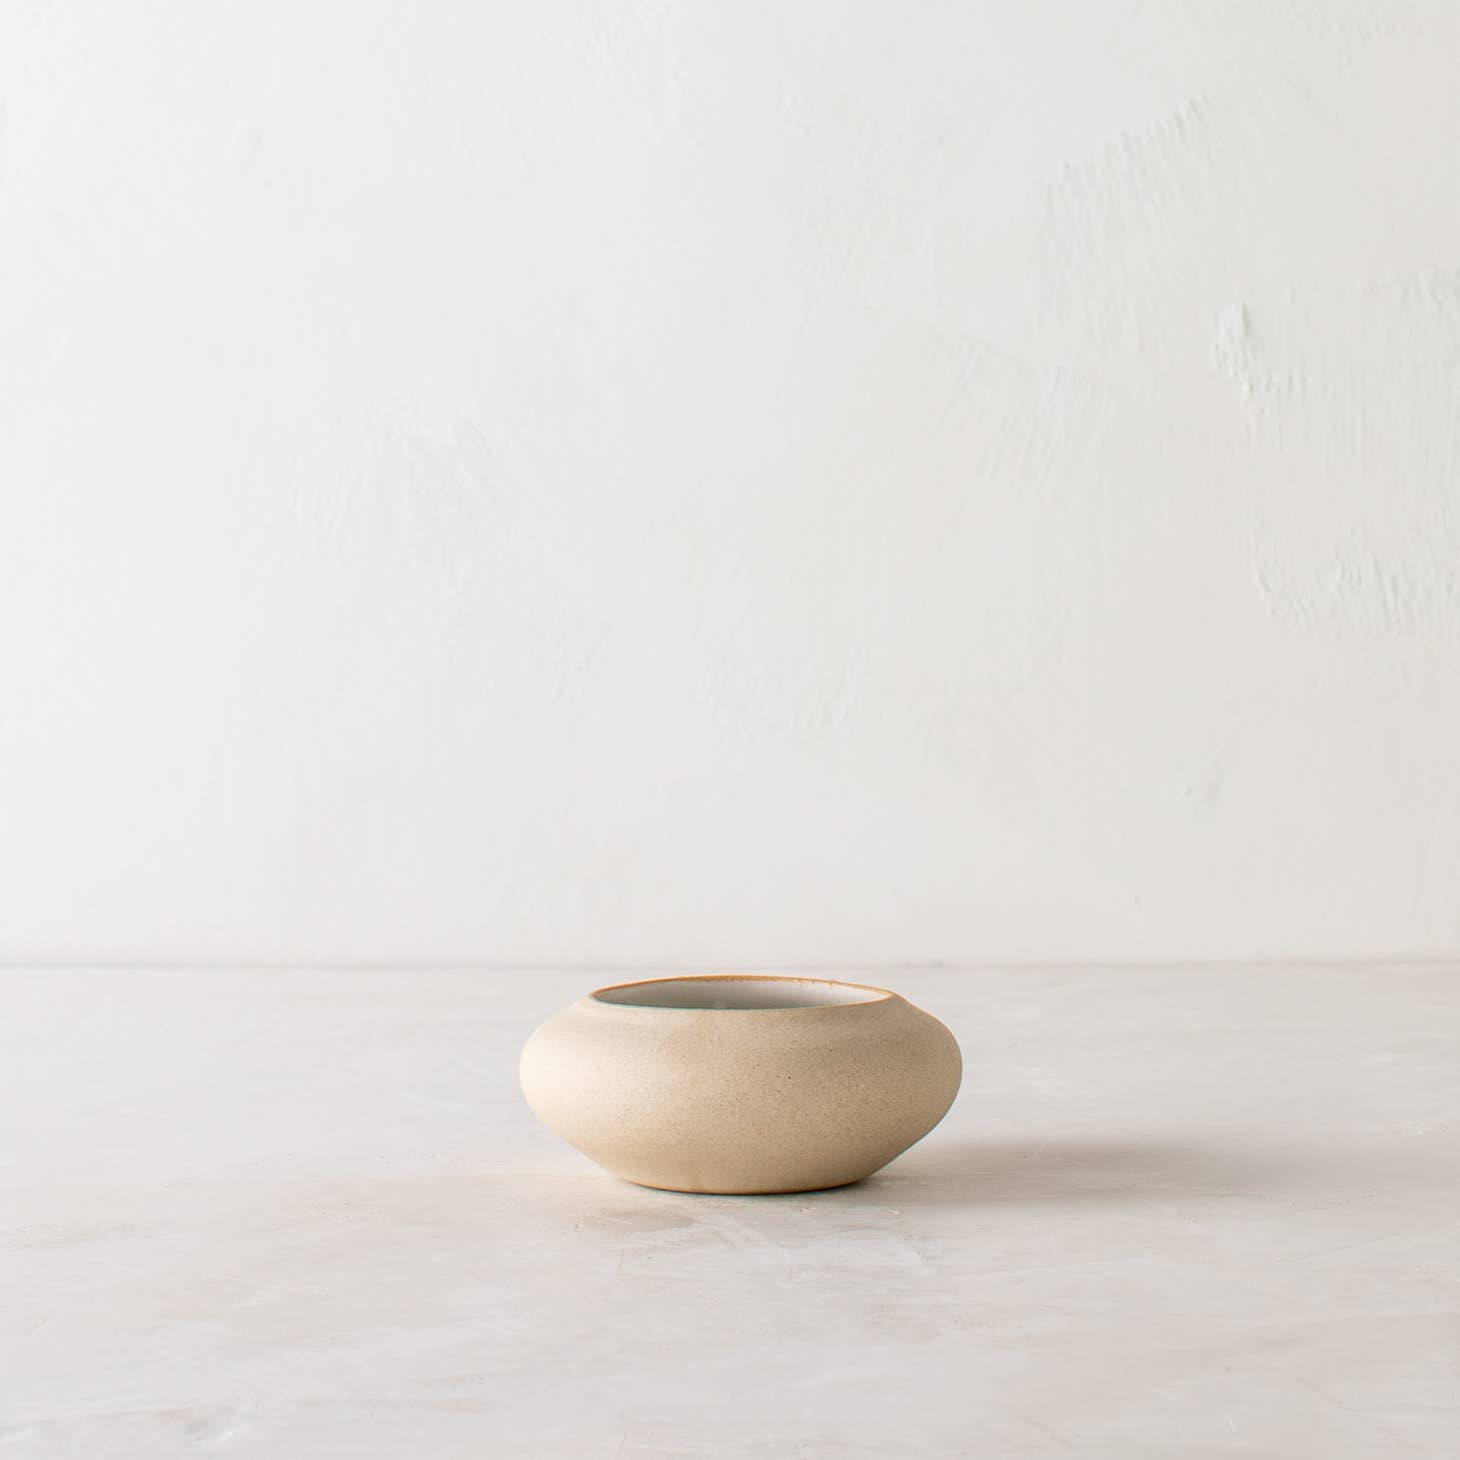 convivial ikebana no 2 vase / Slow down and enjoy the subtle beauty of nature with a handmade ceramic ikebana vase. This round, shallow vase is designed for minimal, ikebana inspired arrangements. Handmade with proprietary sandstone with an ivory glaze on the interior.